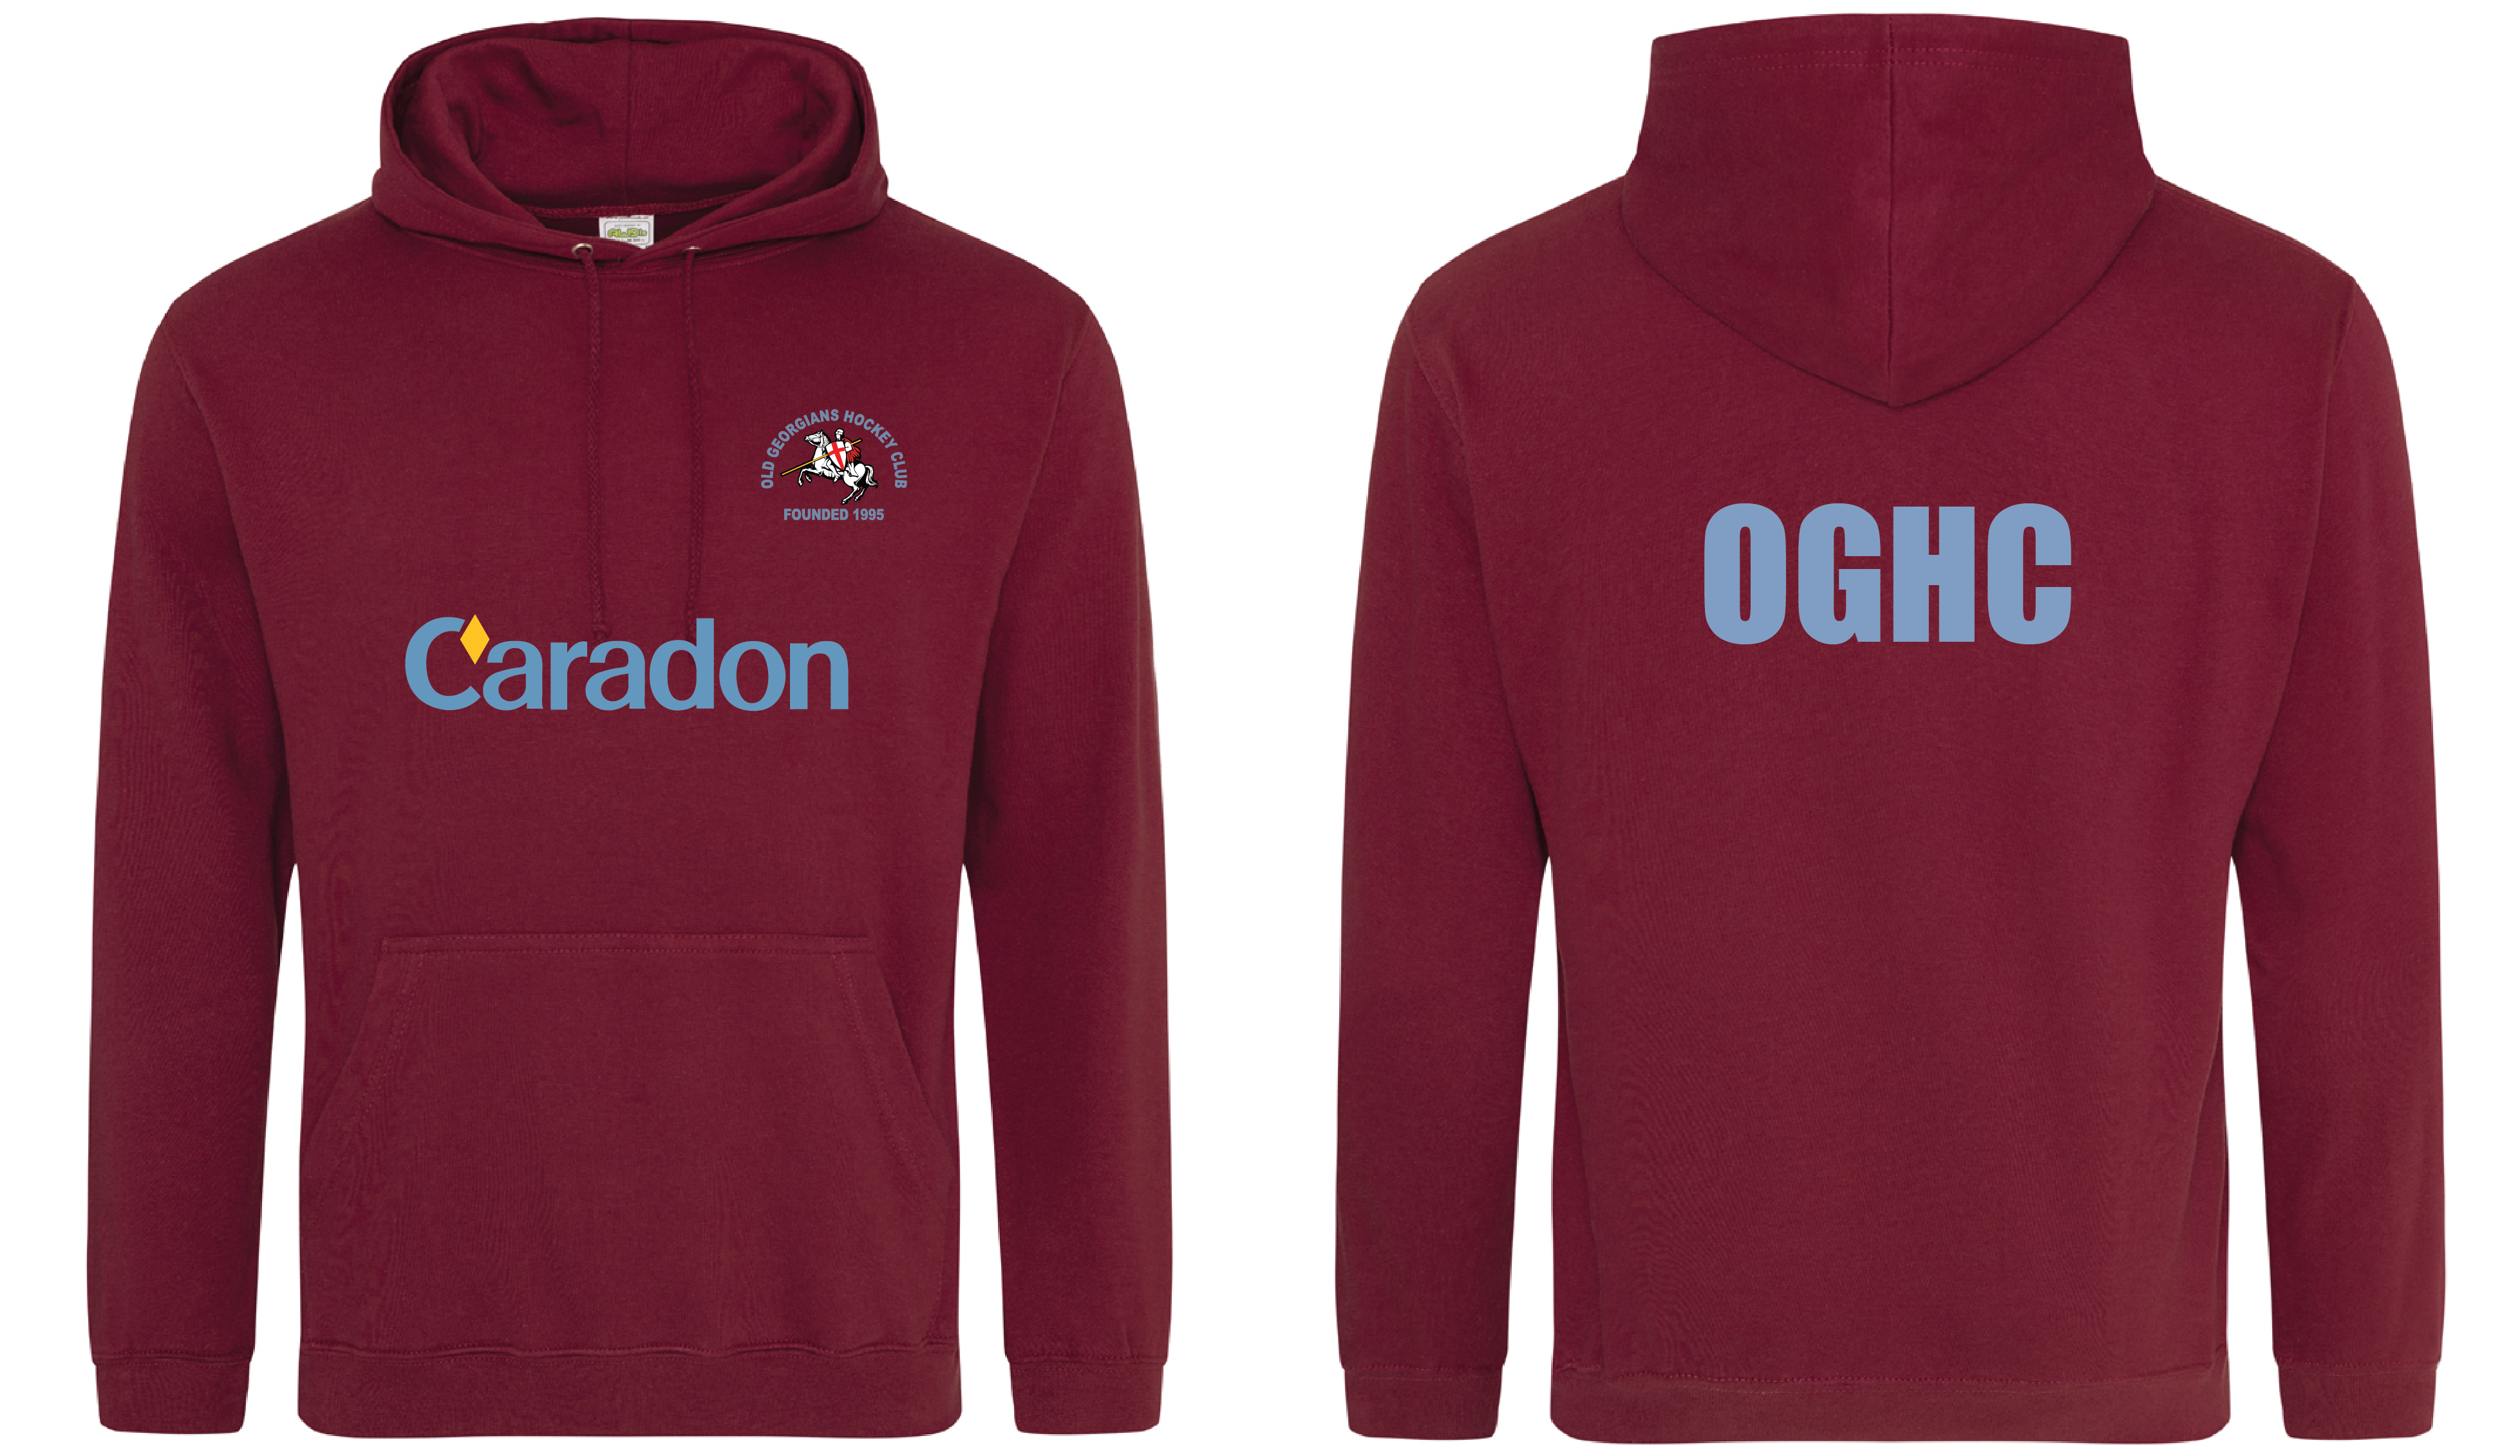 OGHC Youth Hooded Top